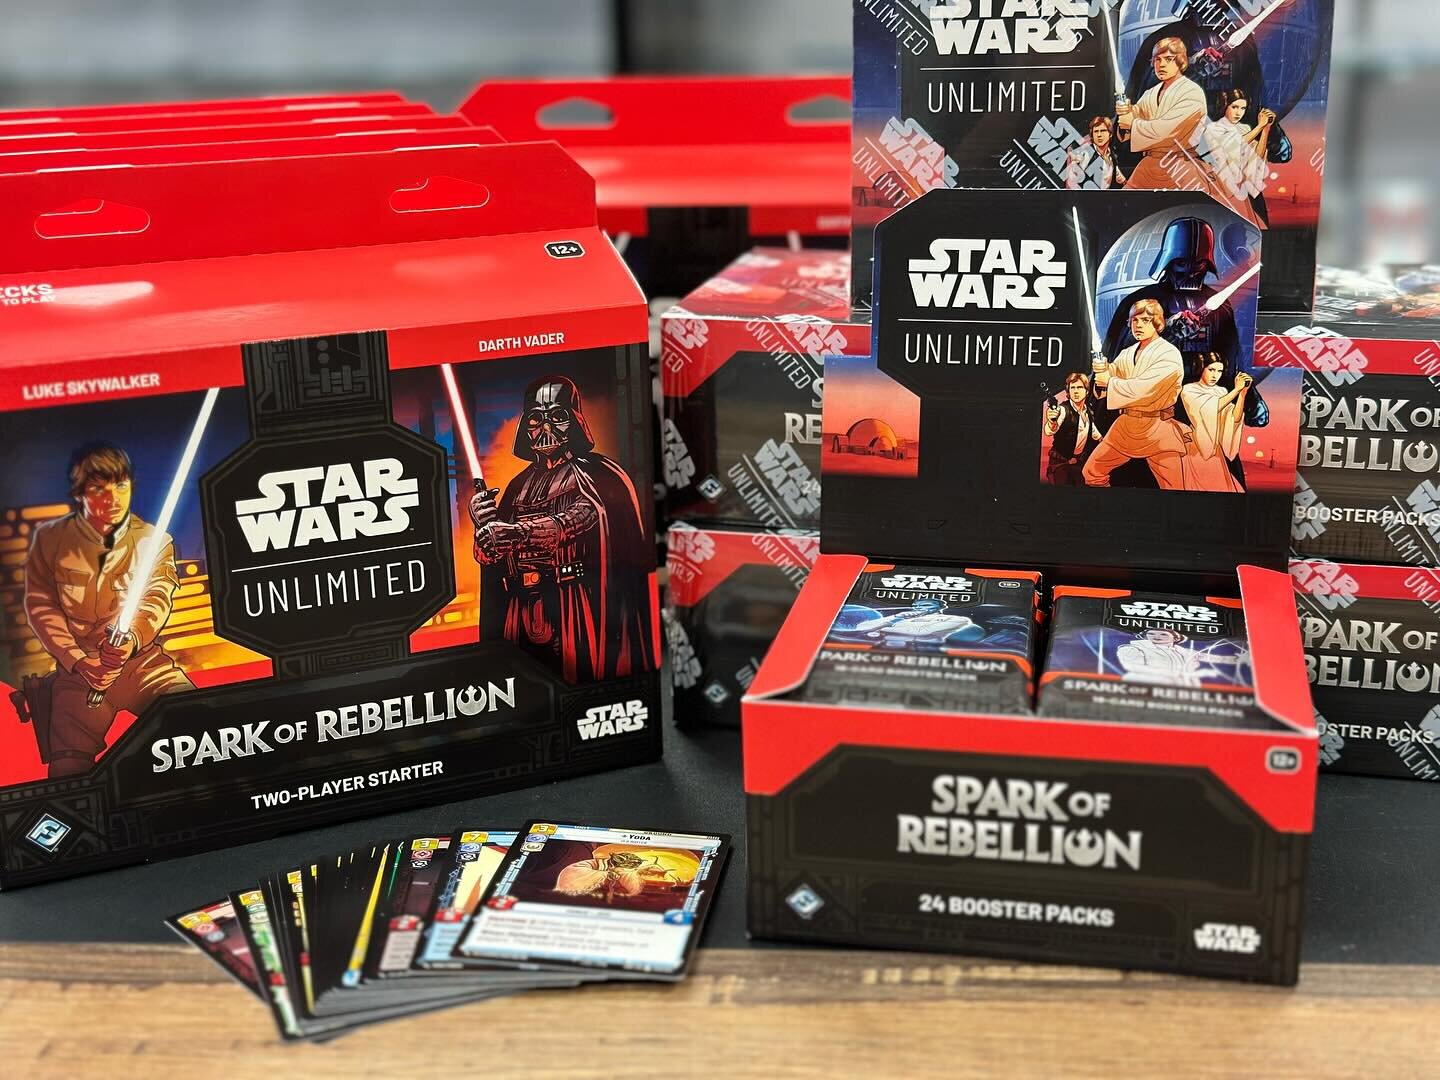 🚨🔥@starwars Spark of Rebellion has landed 🔥🚨

We have plenty of starter decks, booster packs, boxes, and cases available! 

If you&rsquo;re curious stop in and take a look! This new @starwars TCG has everything from playability to collectability!